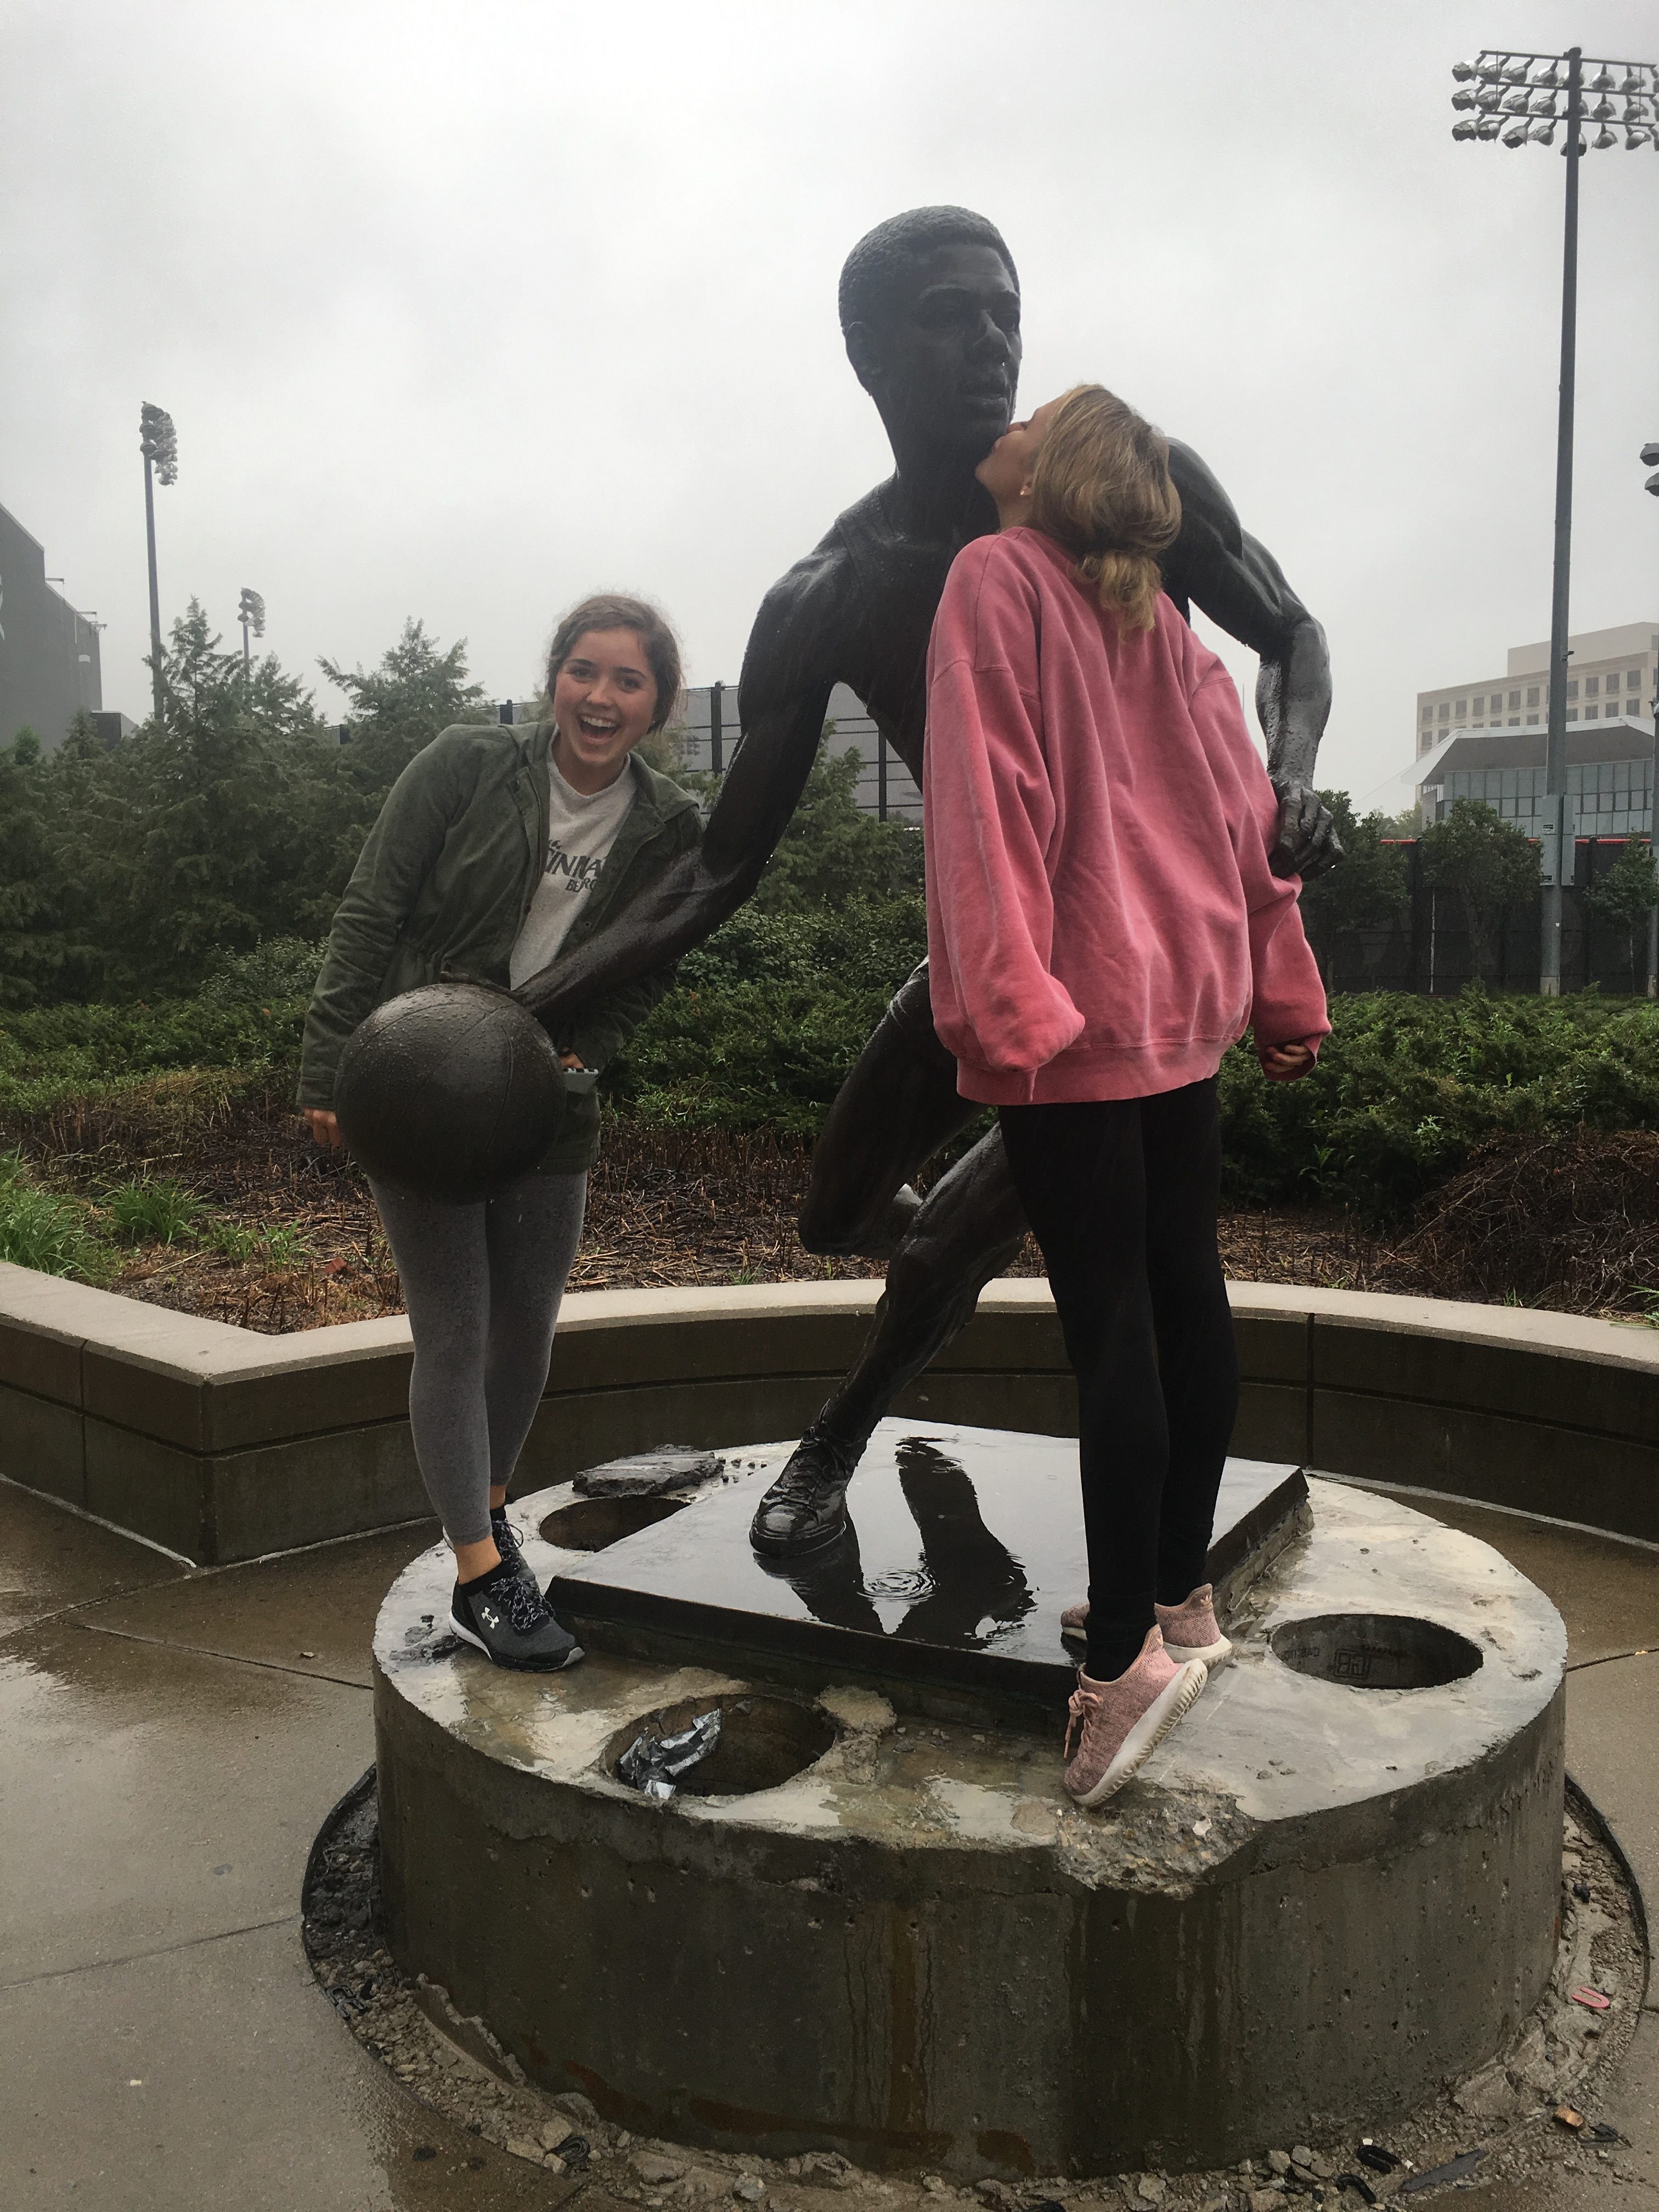 A picture of my two roommates with the Oscar Robertson statue outside of the Fifth Third Arena in its original location.